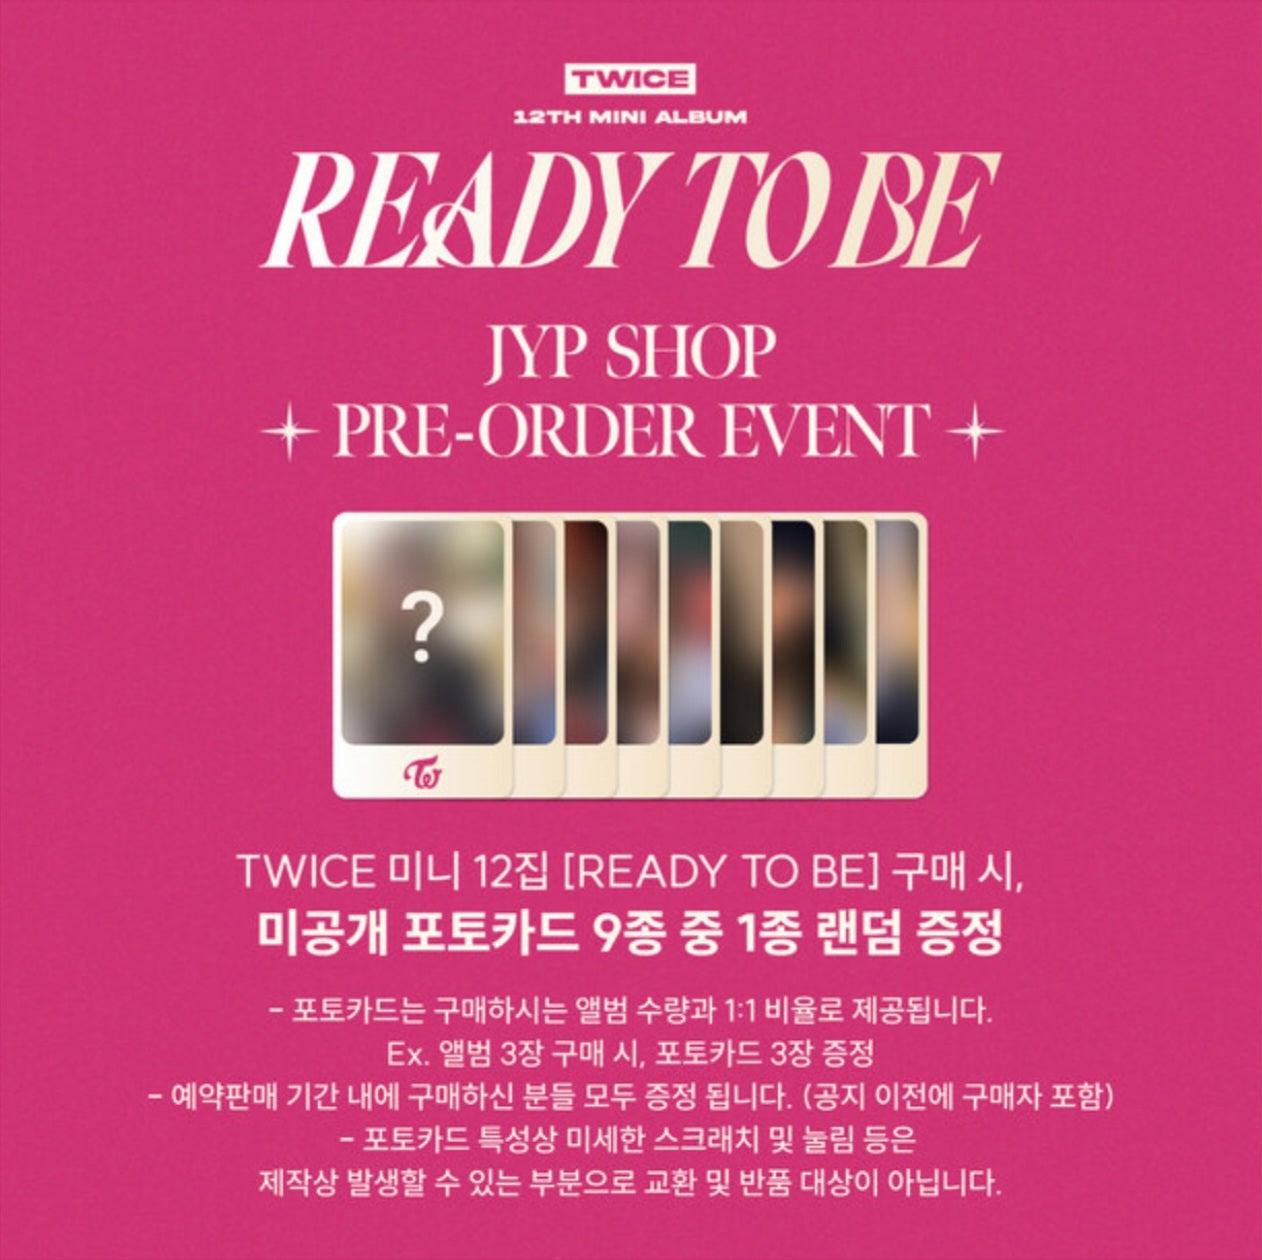 TWICE - READY TO BE (SITE BENEFIT PHOTOCARD) - KKANG